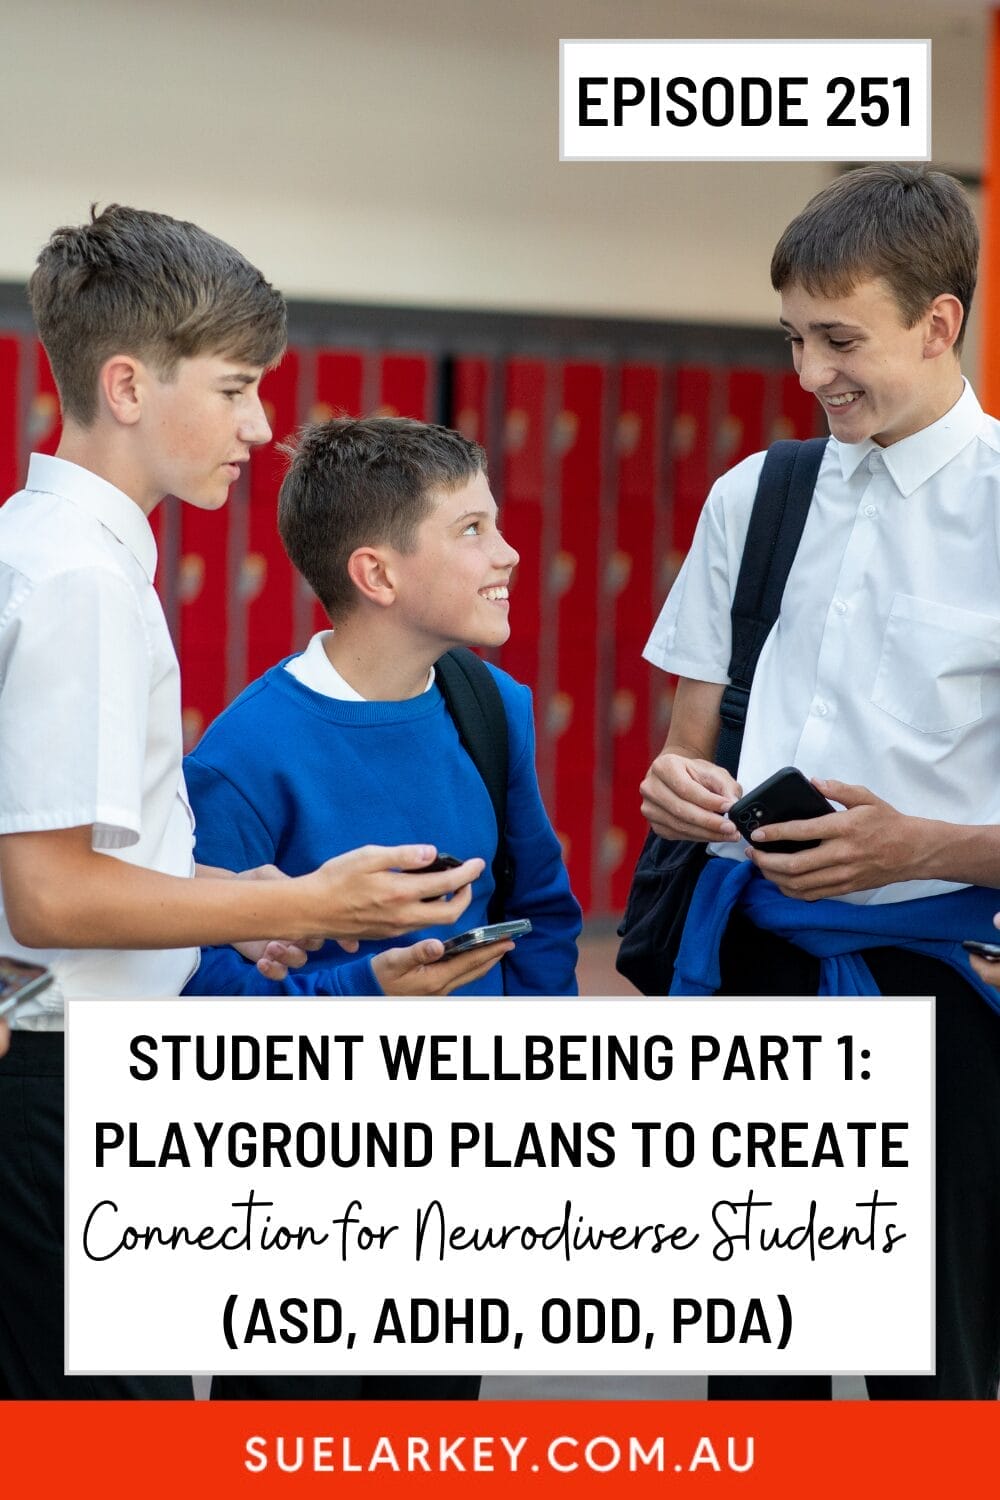 Playground plans for neurodiverse students